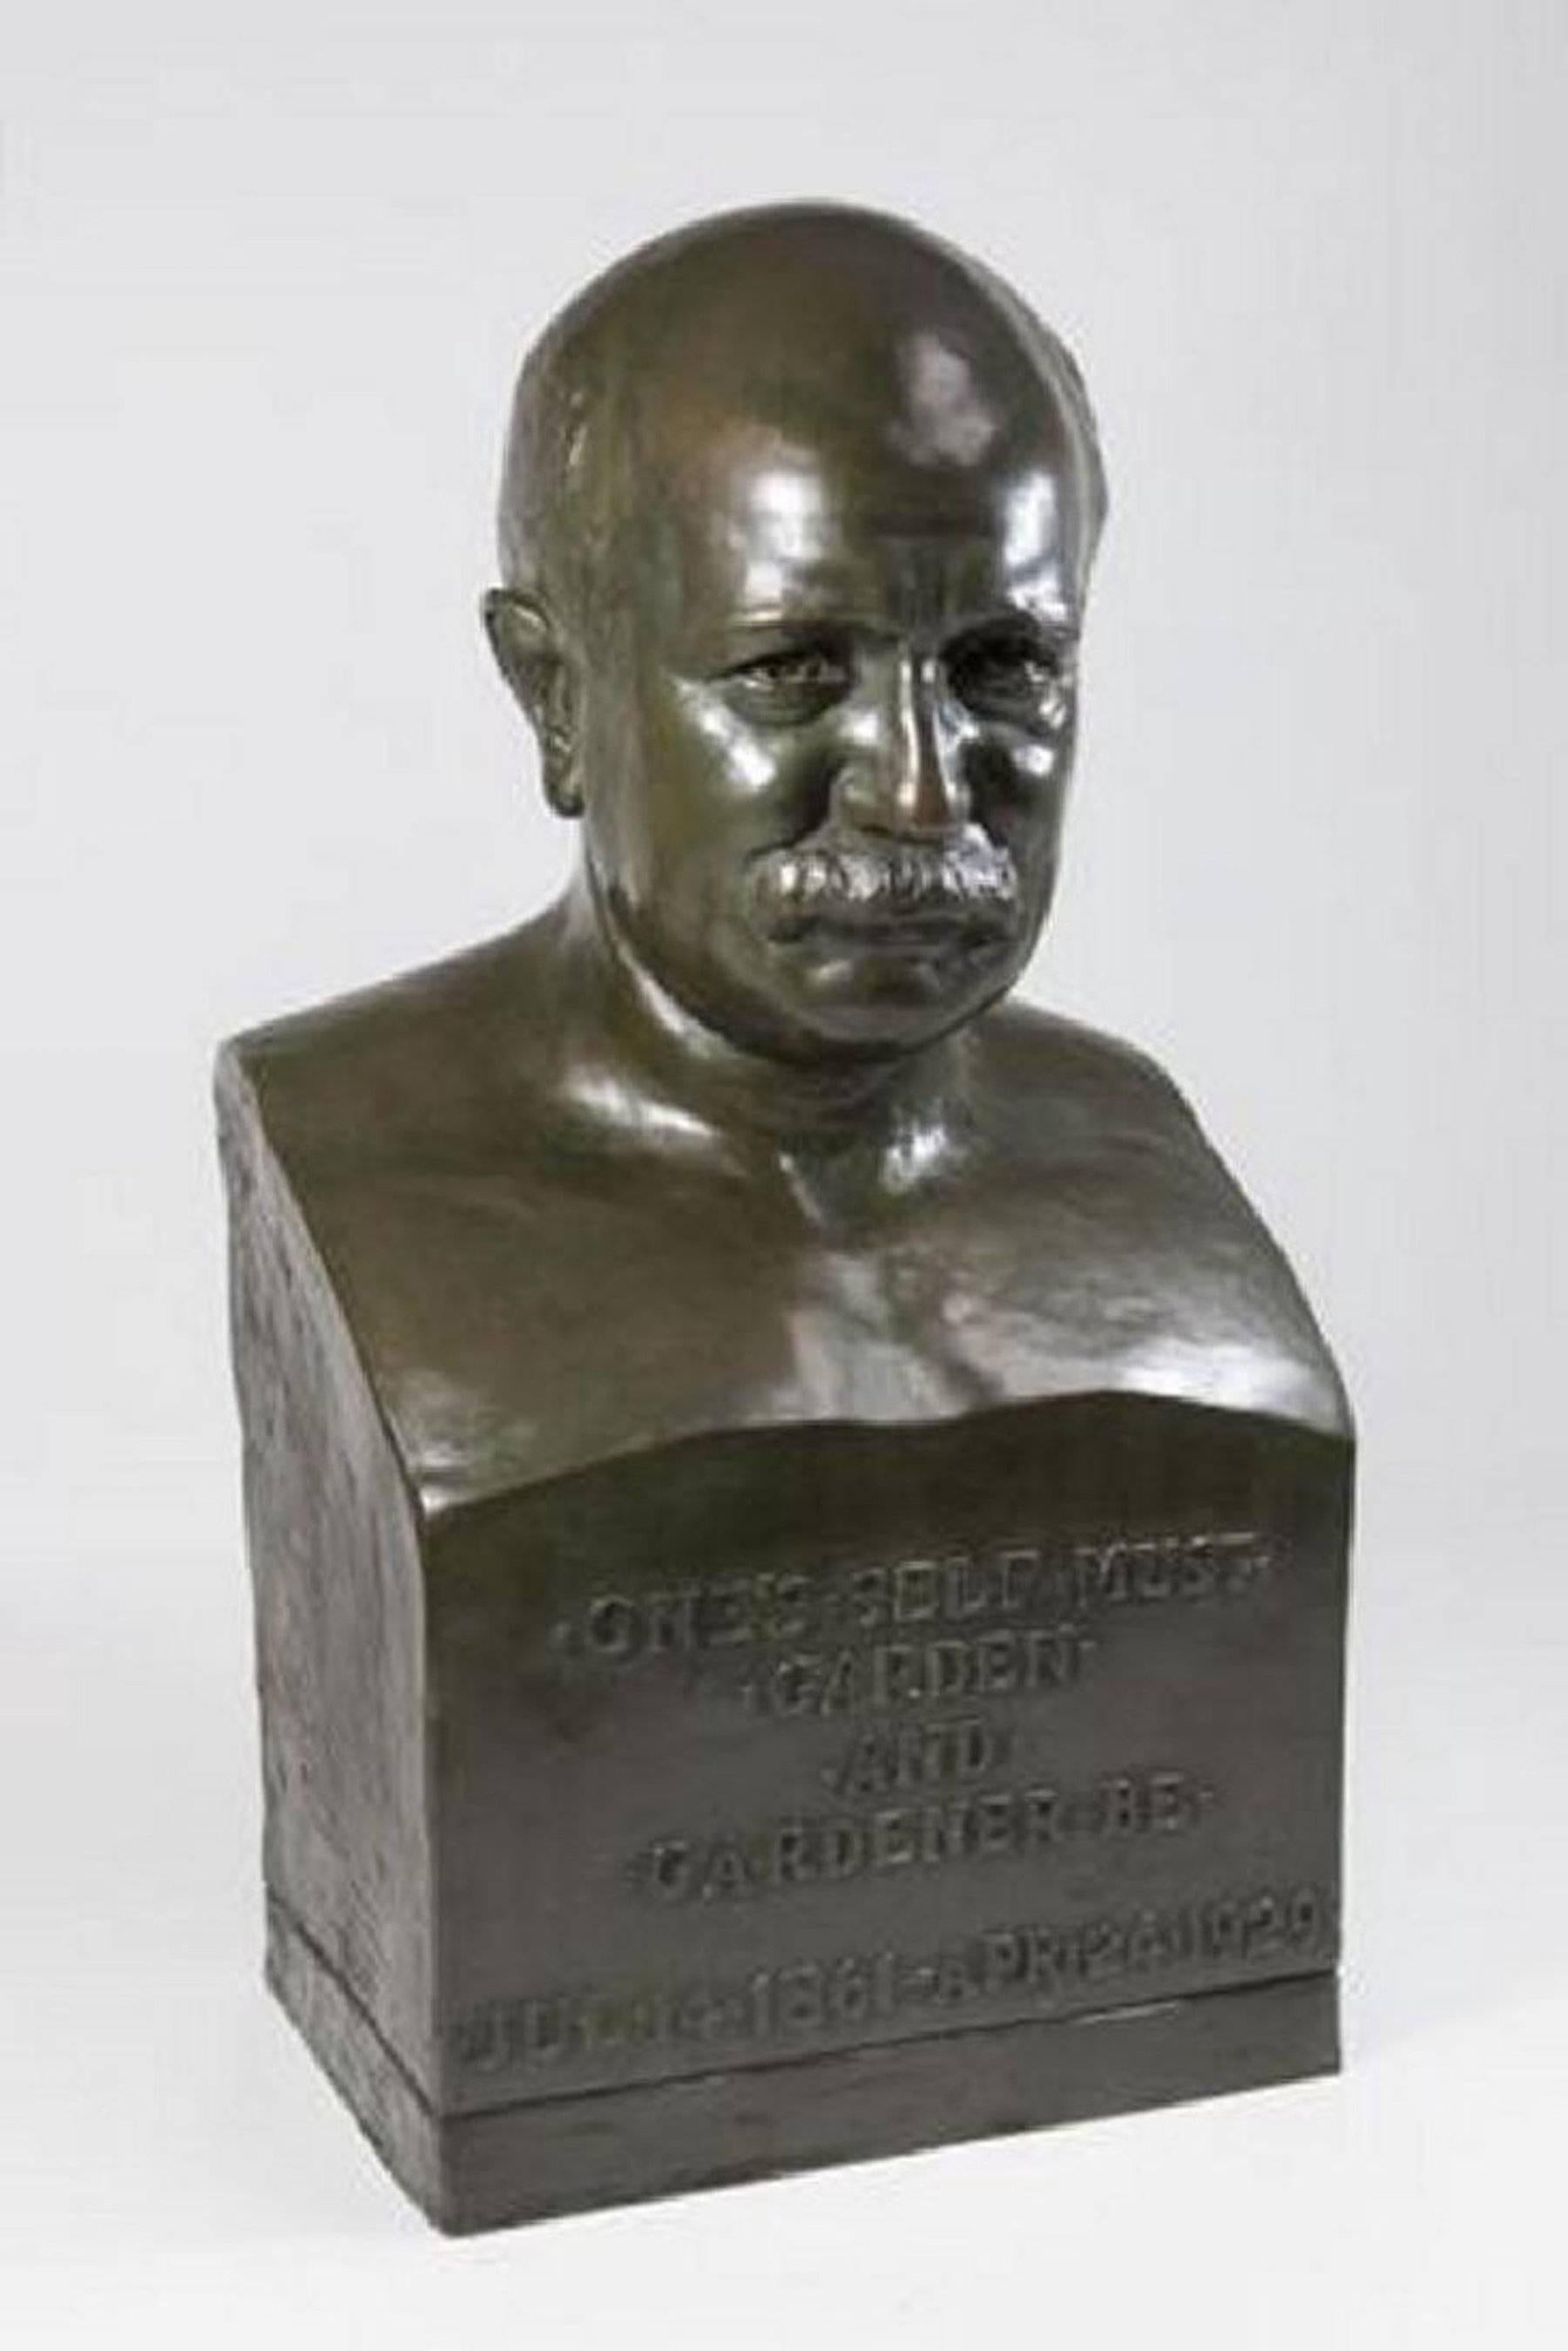 Bronze portrait bust of a Scholar, after the antique, by Jules Butensky
One's Self Must Garden and Gardener Be
Jul. 14, 1861-Apr. 24, 1929
Signed in script and dated.

